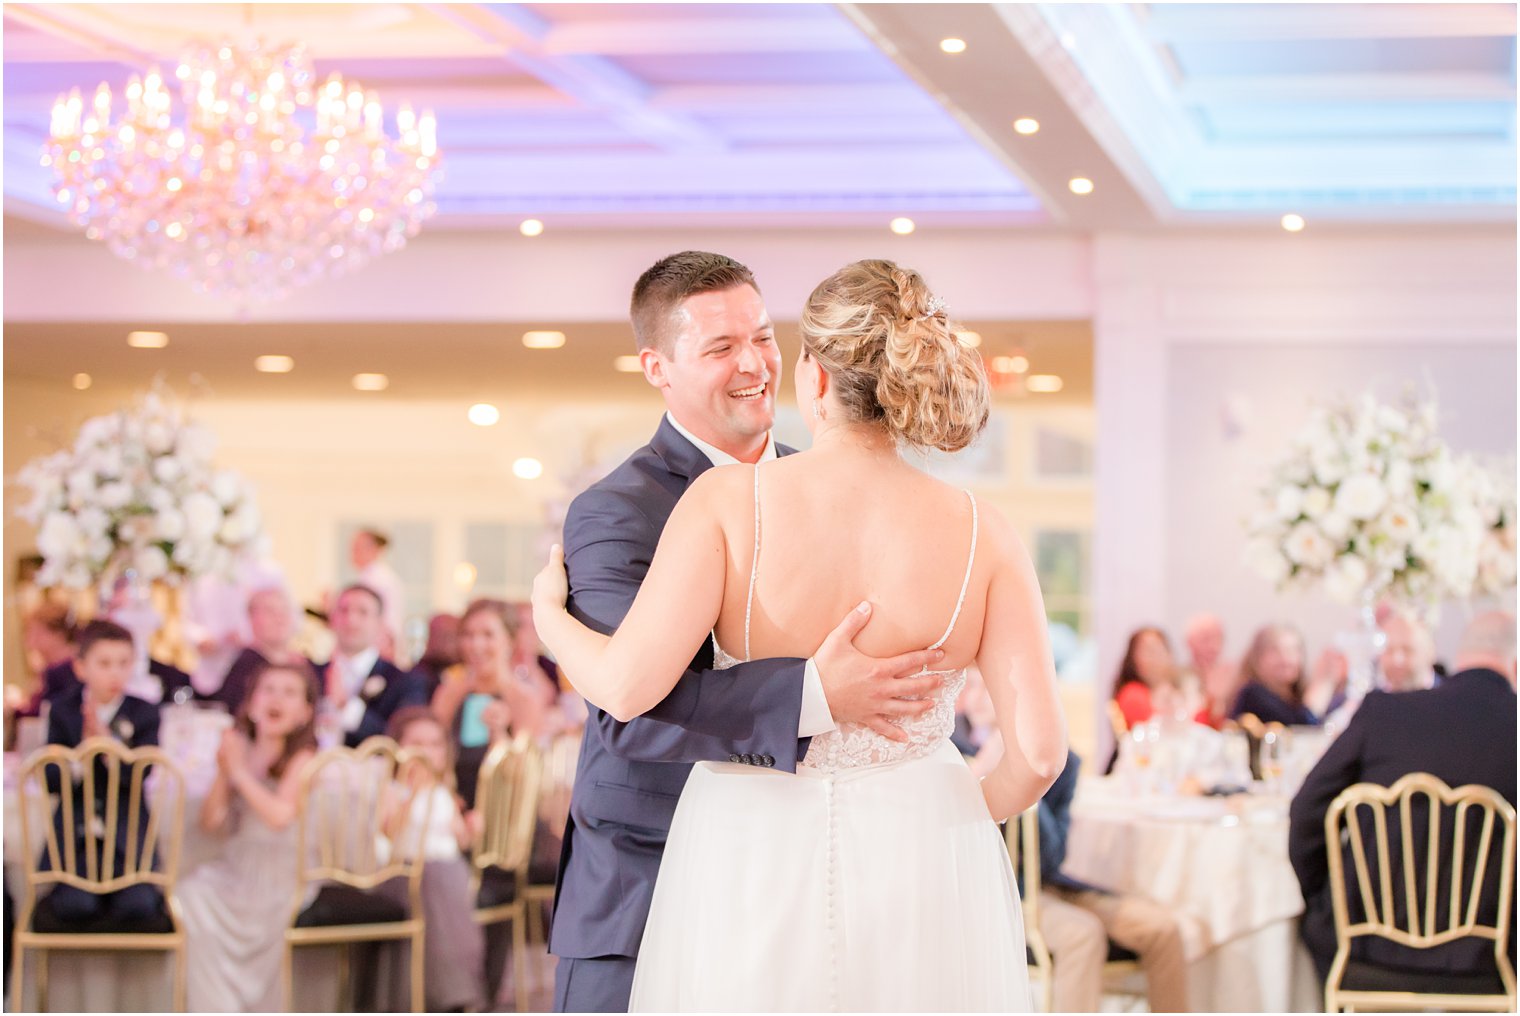 First dance during Wedding reception at The Mill at Lakeside Manor in Spring Lake NJ